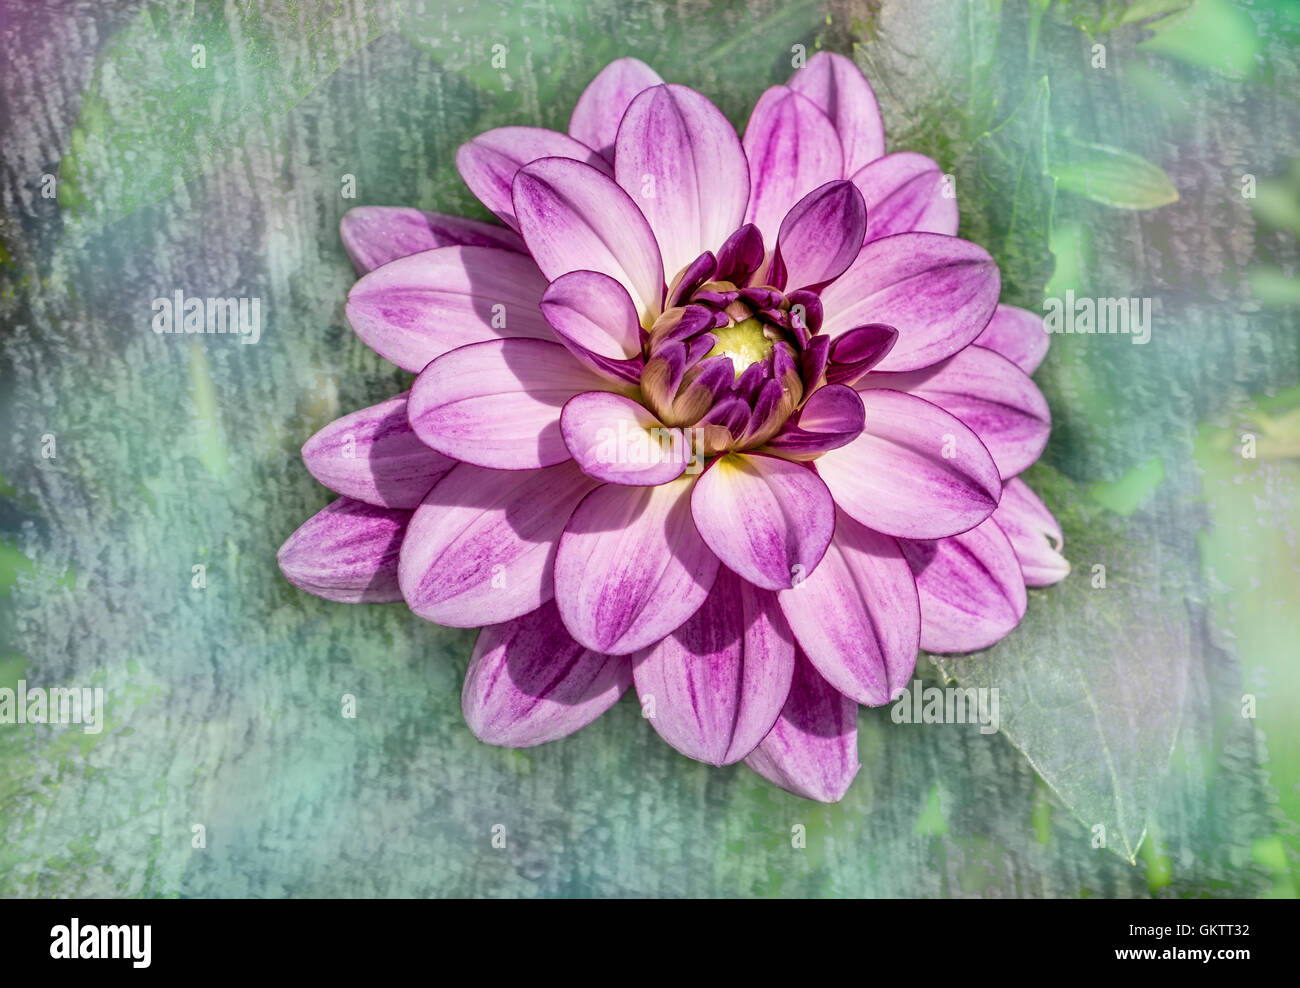 Beautiful single pink dahlia flower head isolated against paint effect background suitable for greeting card print Stock Photo